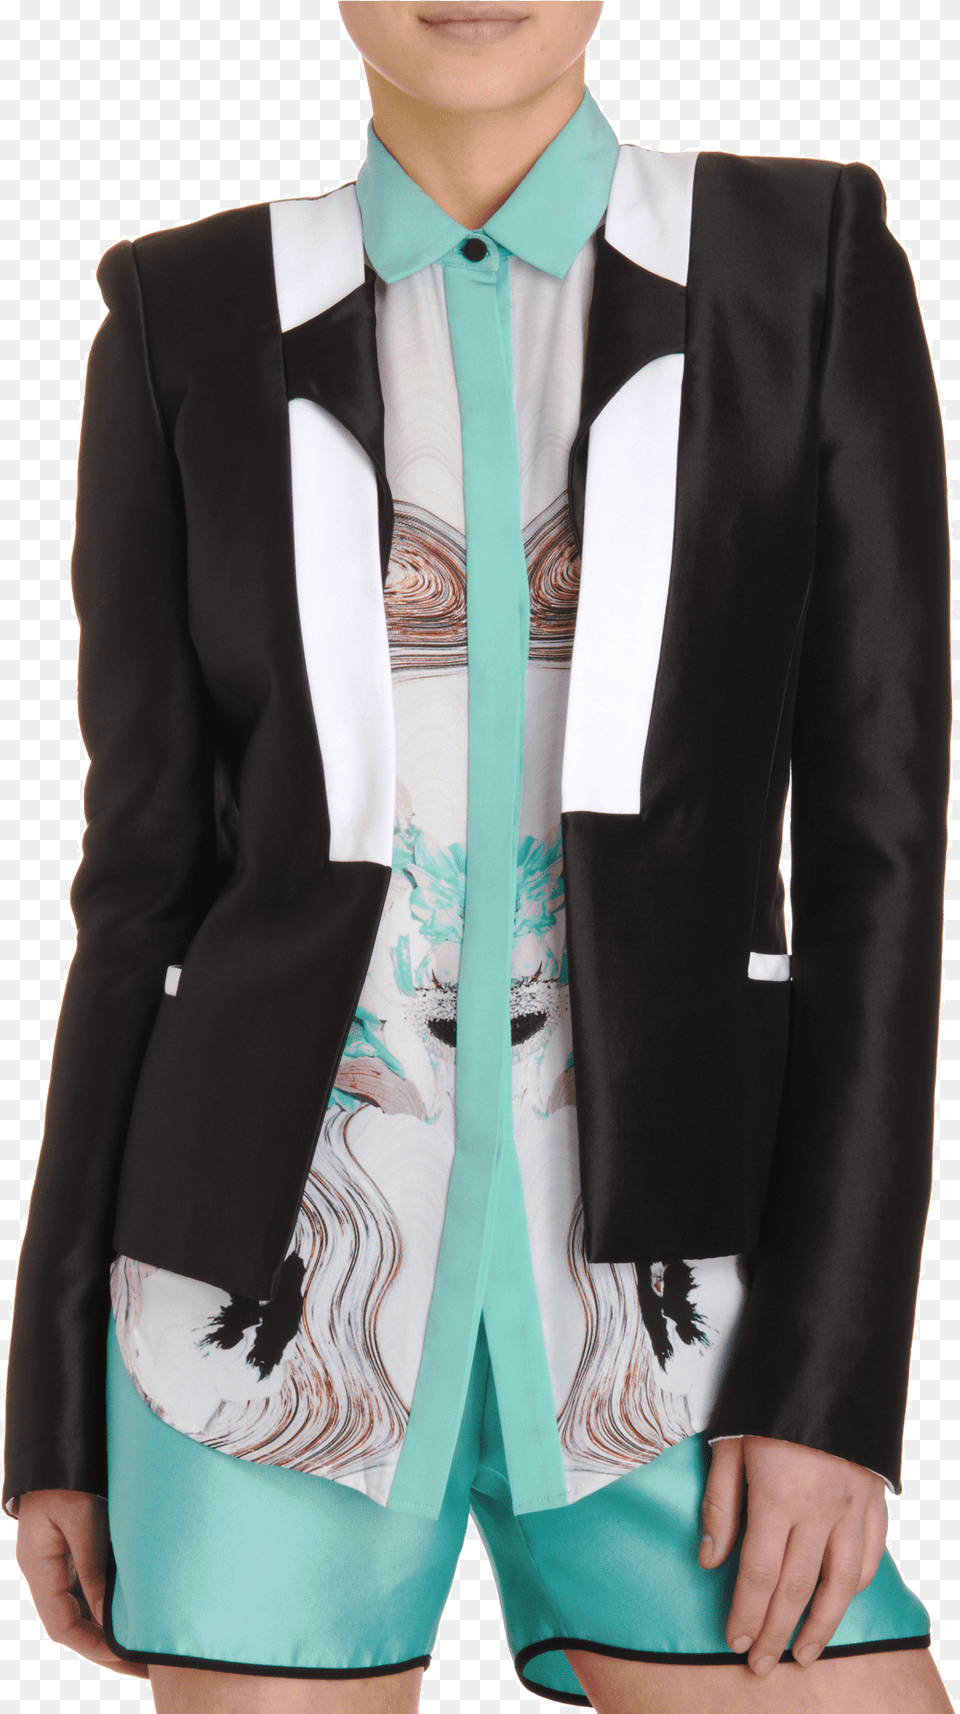 Like This Superb Black And White Prabal Gurung Tuxedo, Accessories, Tie, Suit, Jacket Png Image